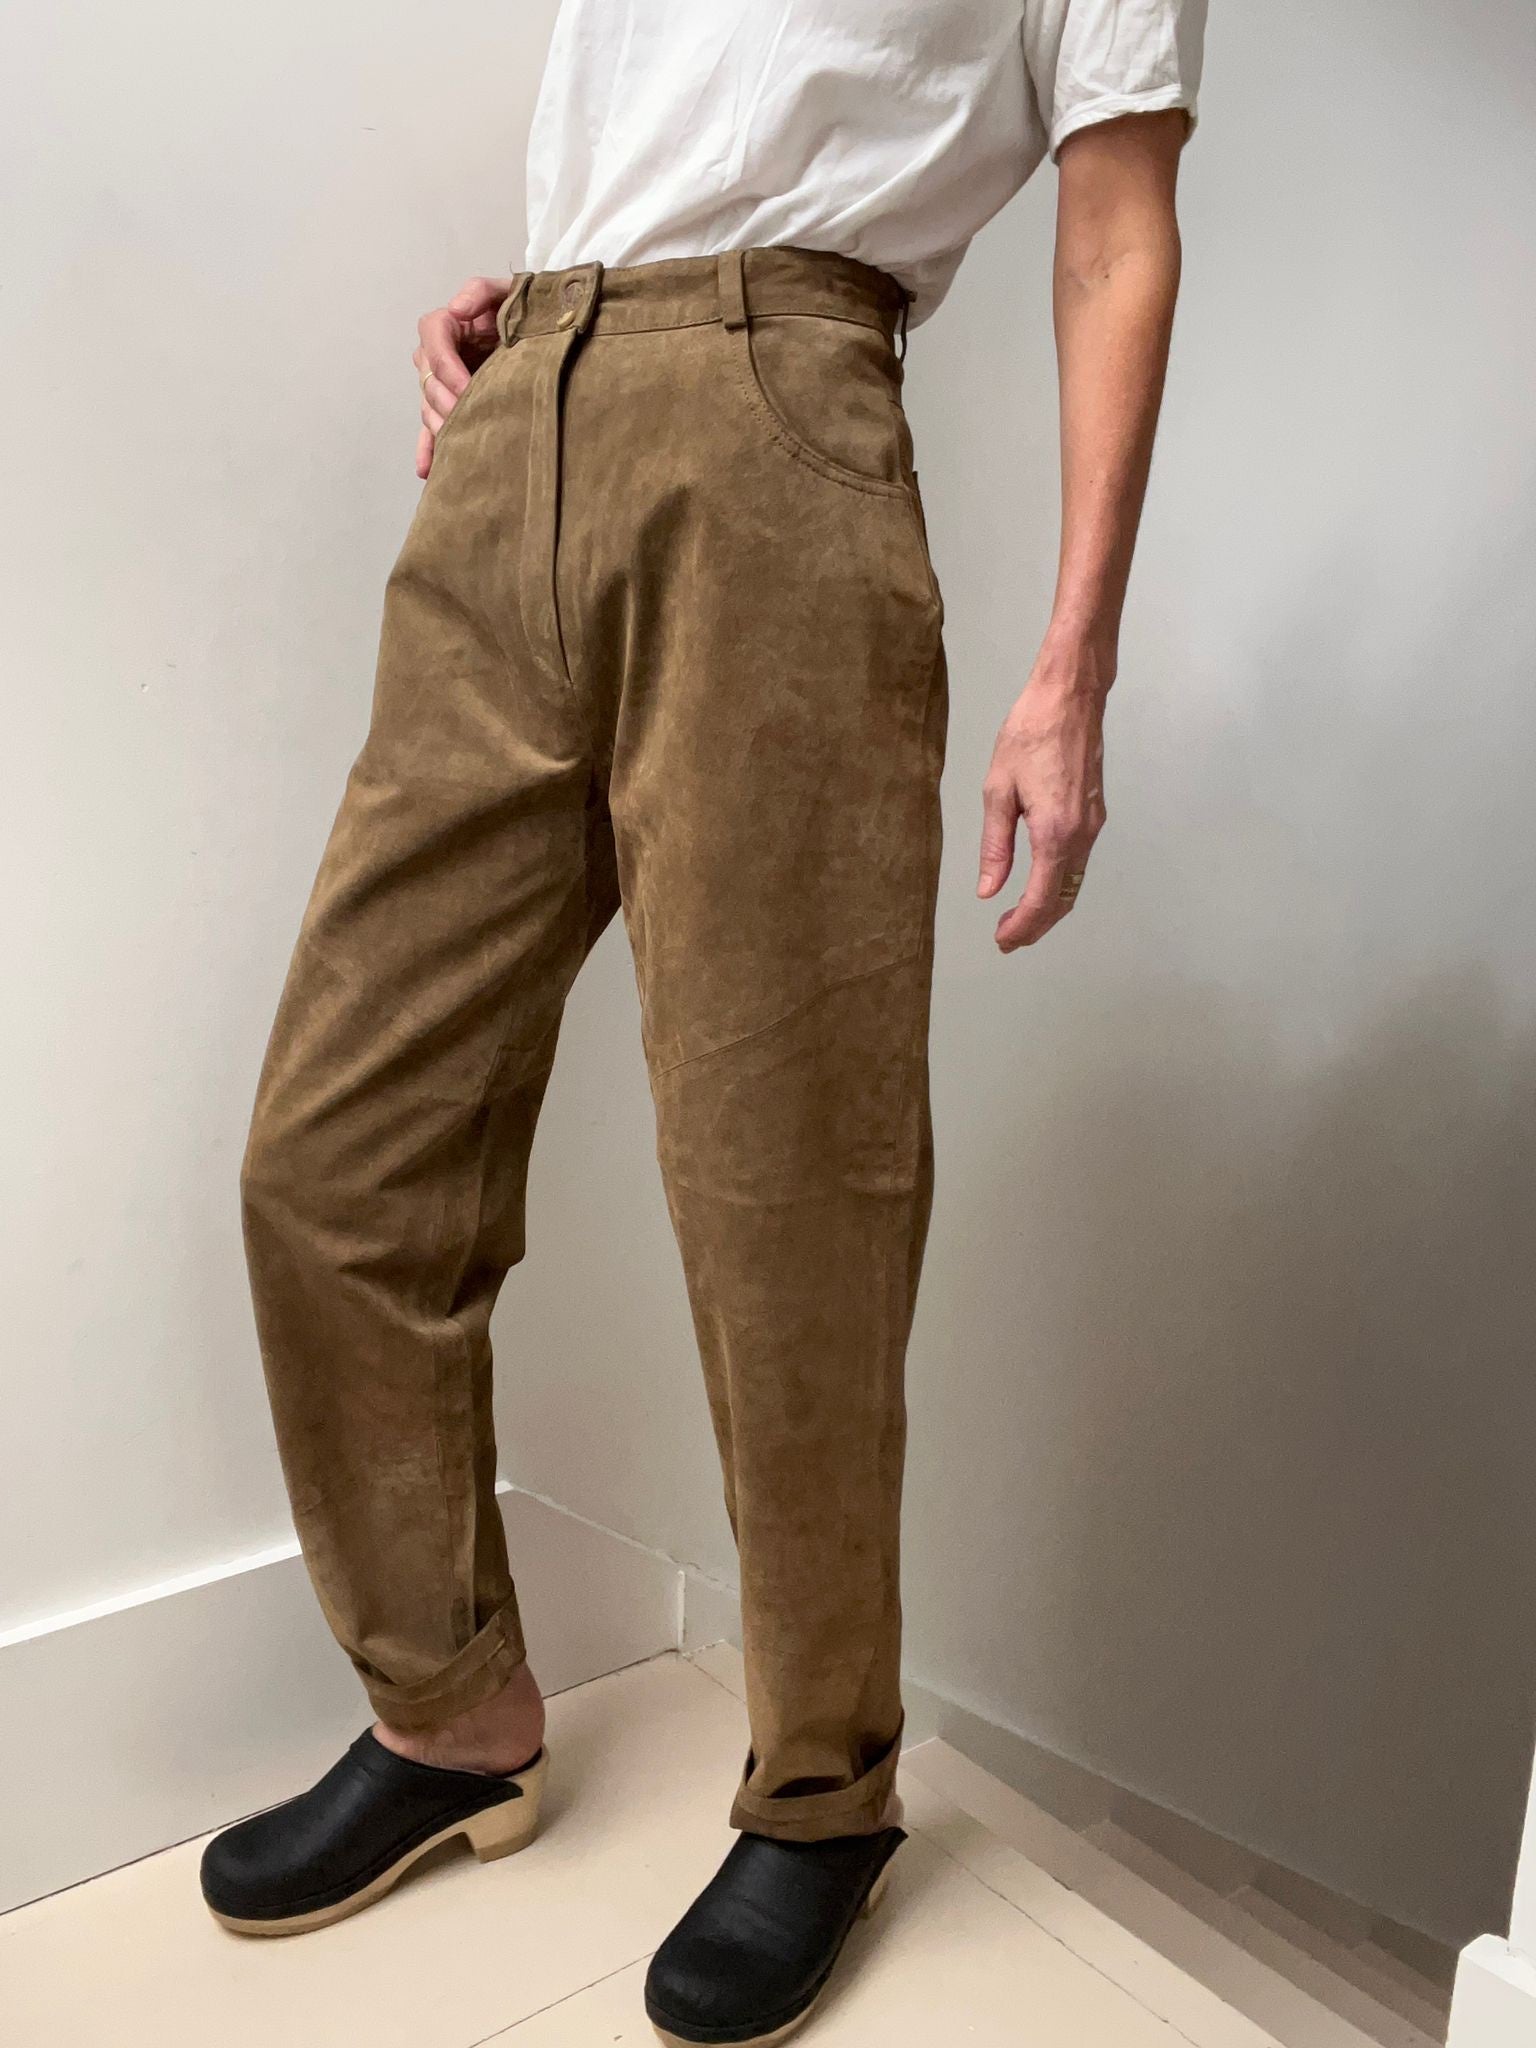 Suede Pants  How to Wear and Where to Buy  Chictopia  Brown pants  outfit Pant outfits for women Suede pants